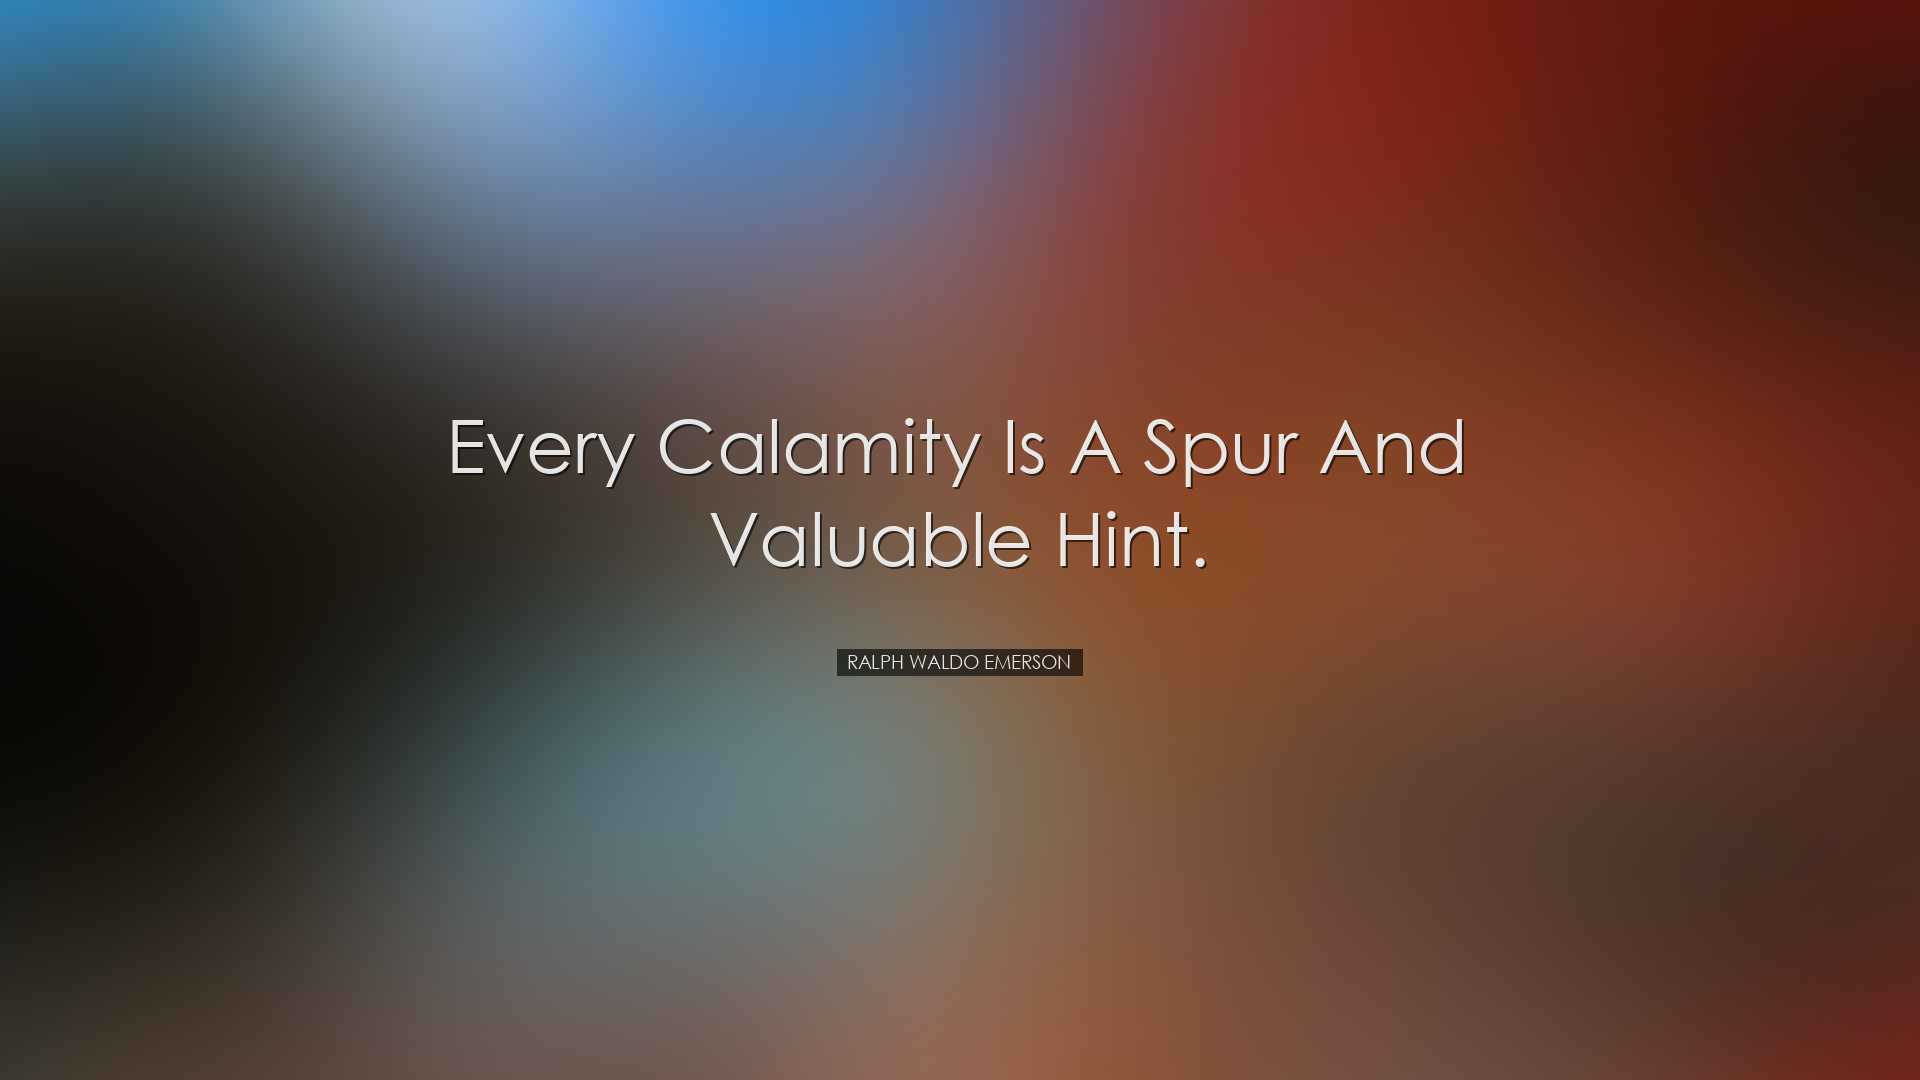 Every calamity is a spur and valuable hint. - Ralph Waldo Emerson